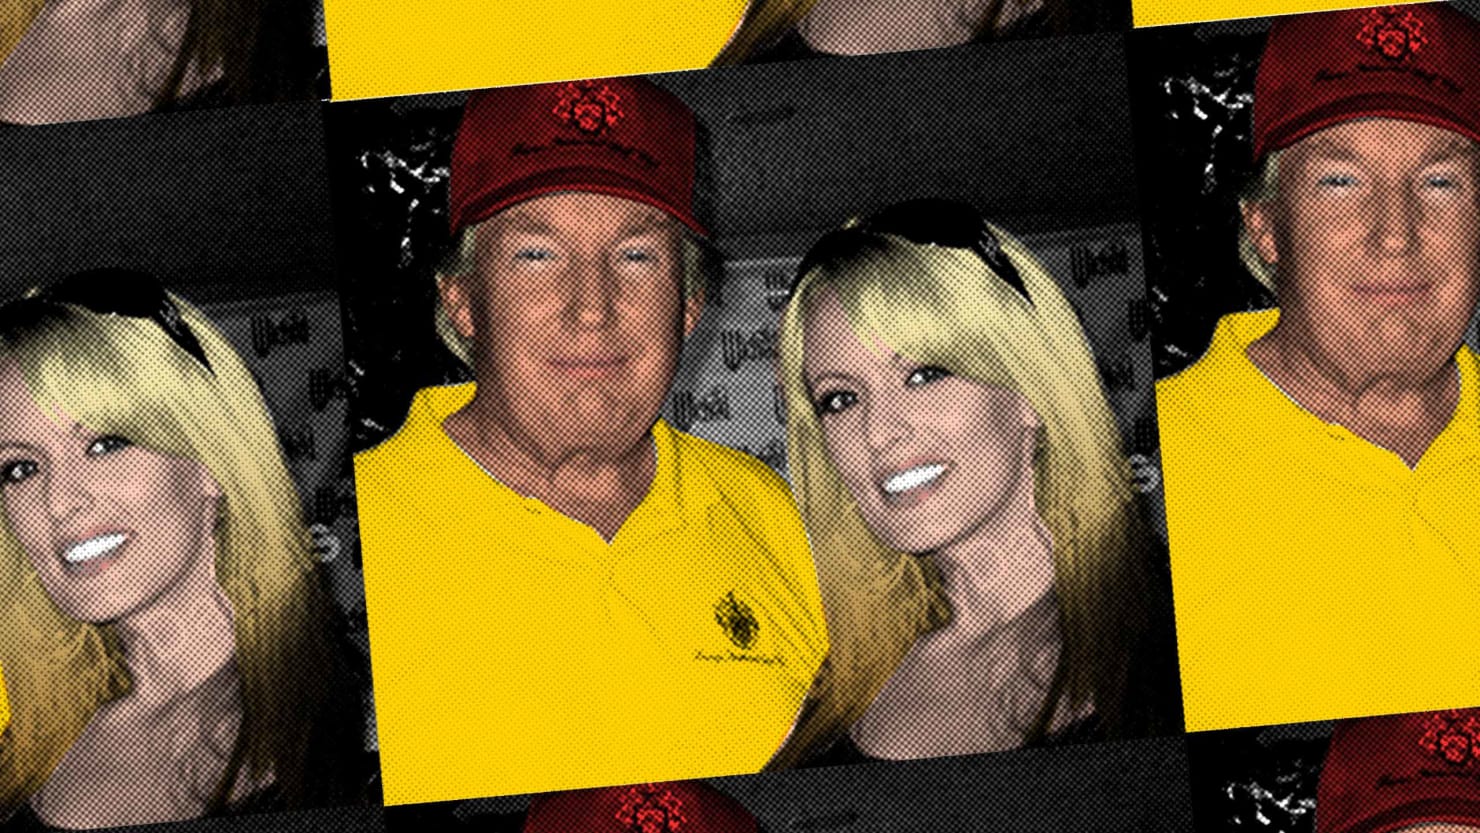 Porn Star Donald Trump And Stormy Daniels Invited Me To Their Hotel Room